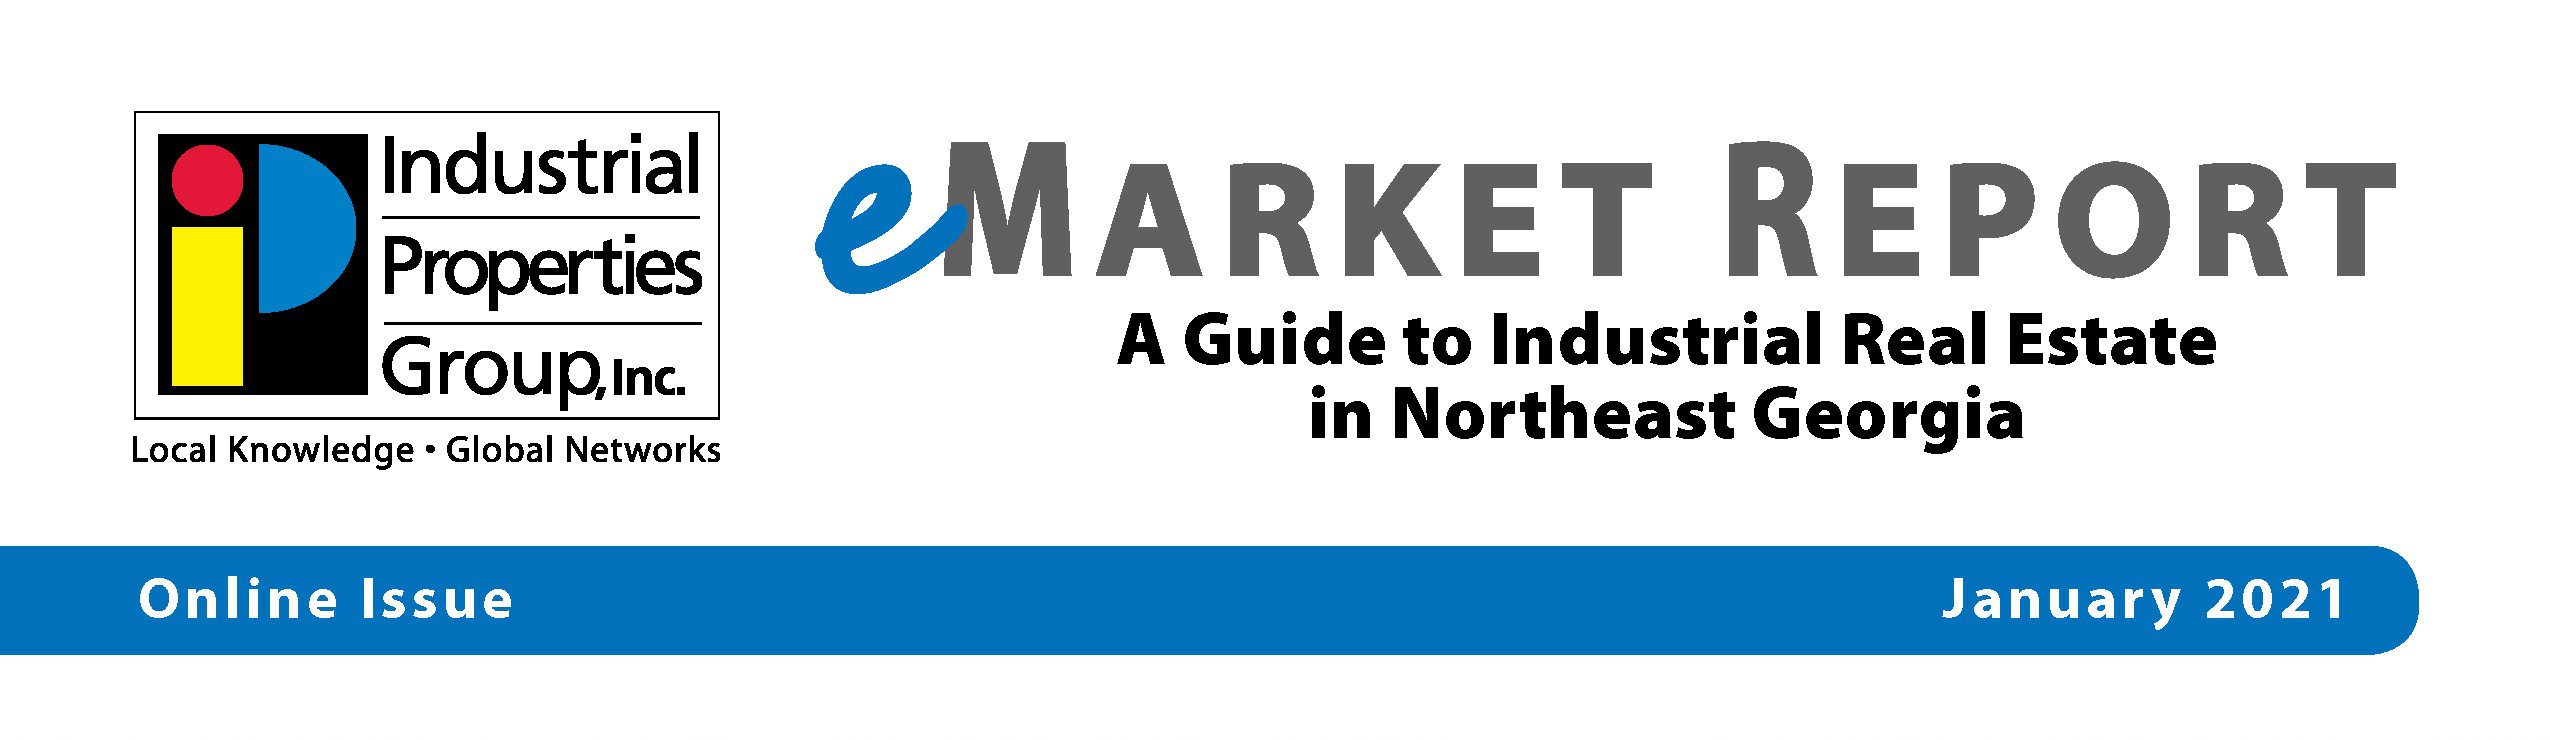 A guide to industry in northeast ohio